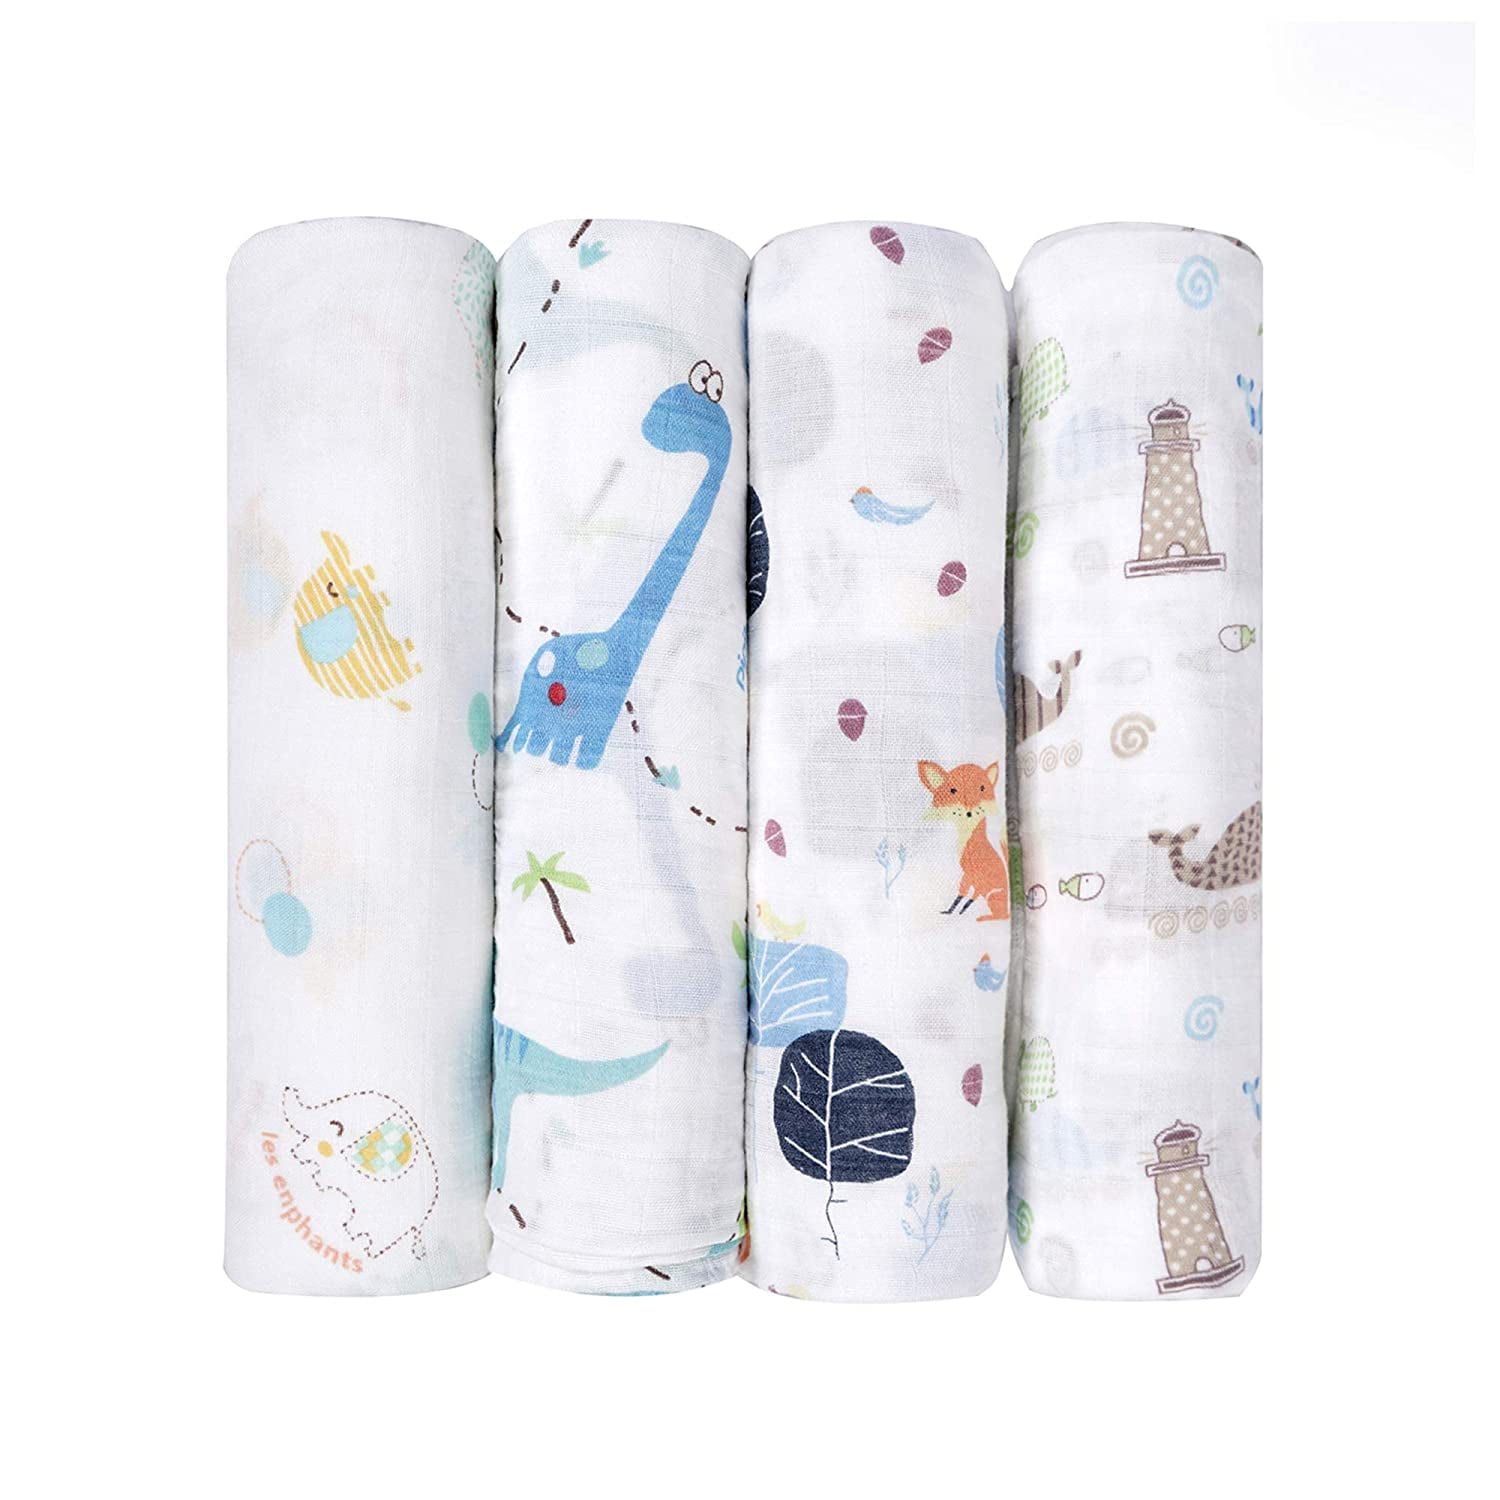 Elephant,Fox,Whale,Dinosaur 47 X 47 inch 4 Packs Viviland Baby Muslin Swaddle Blanket for Newborn Boys and Girls 70% Bamboo 30% Cotton Receiving Blanket Swaddle Wrap with Gift Box 